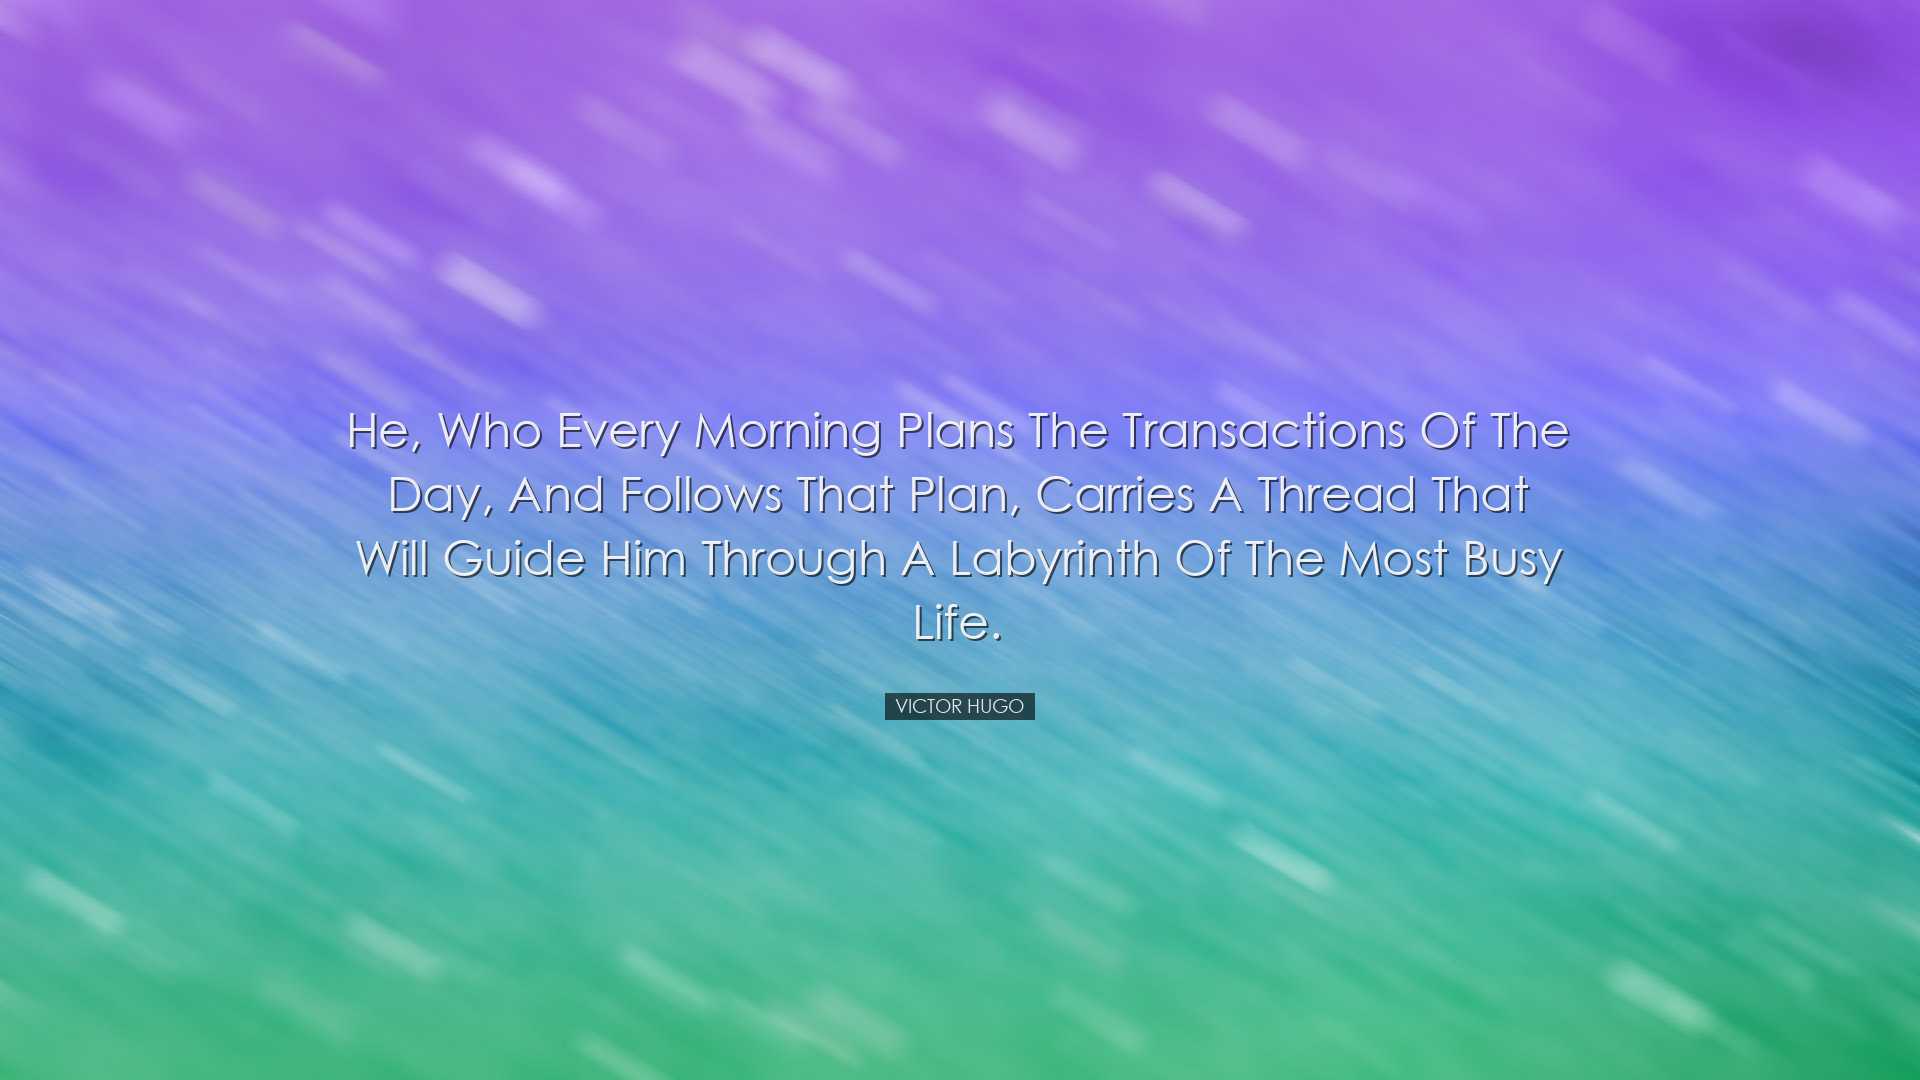 He, who every morning plans the transactions of the day, and follo